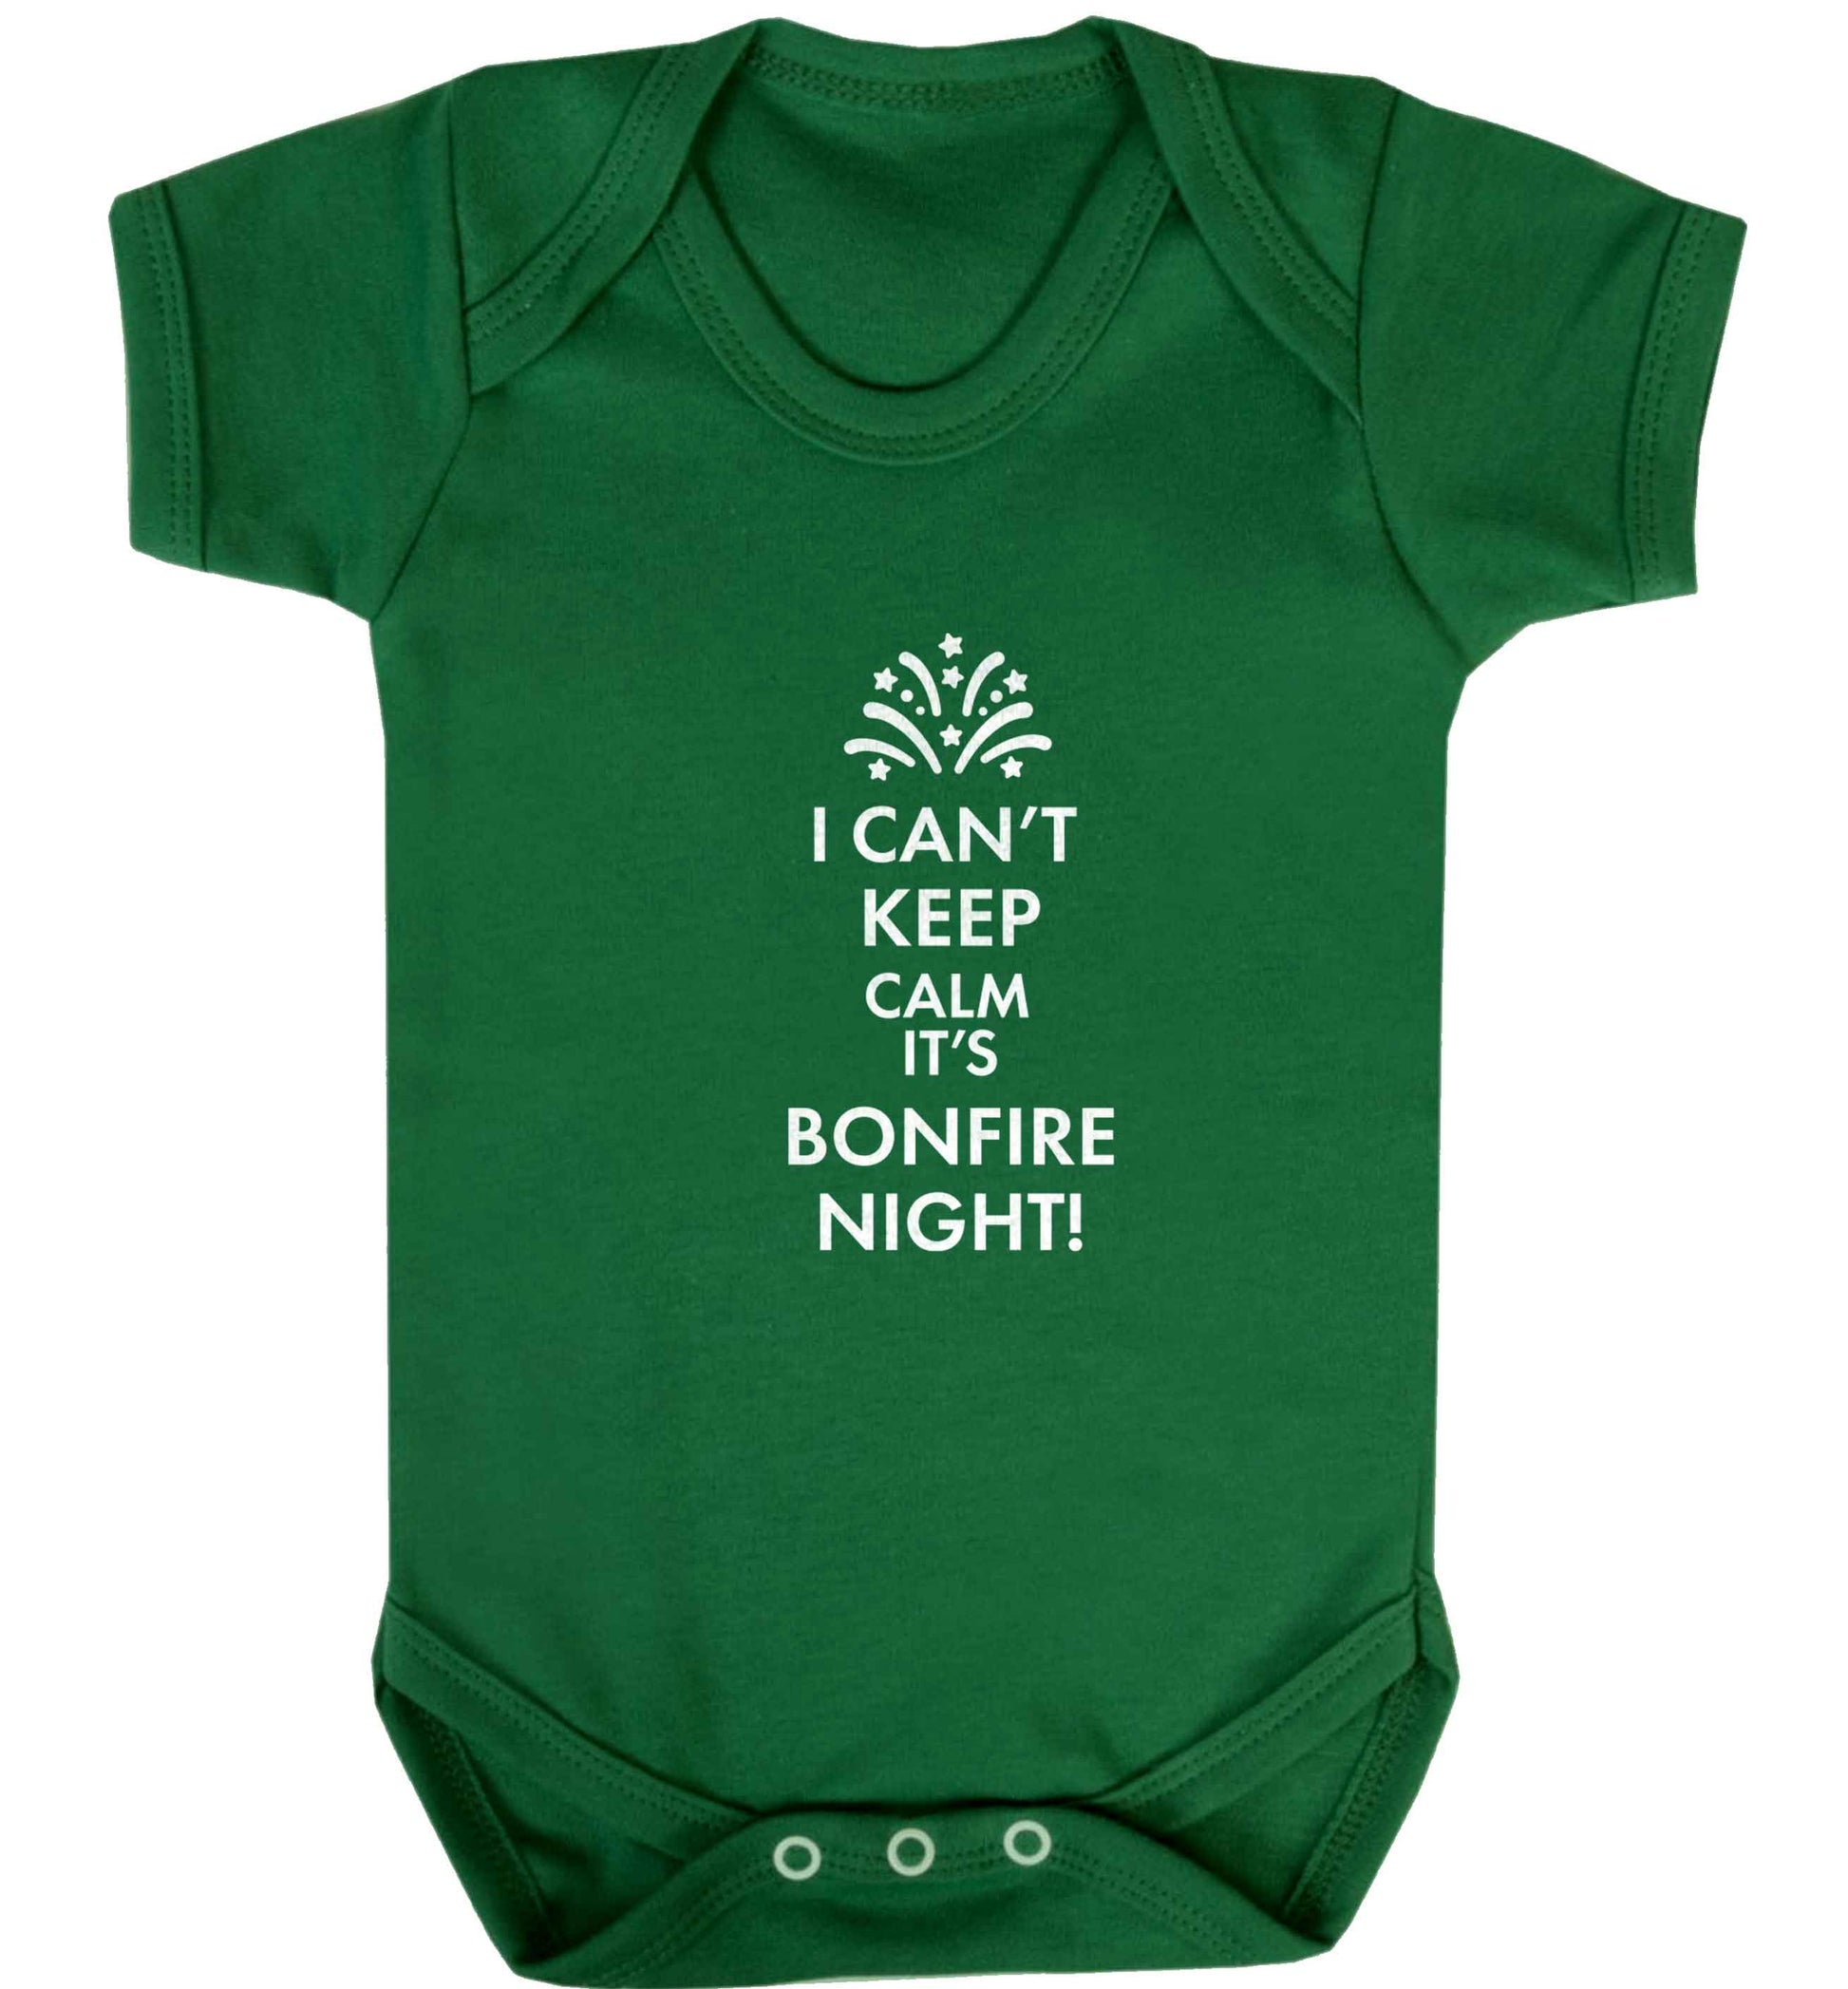 I can't keep calm its bonfire night baby vest green 18-24 months